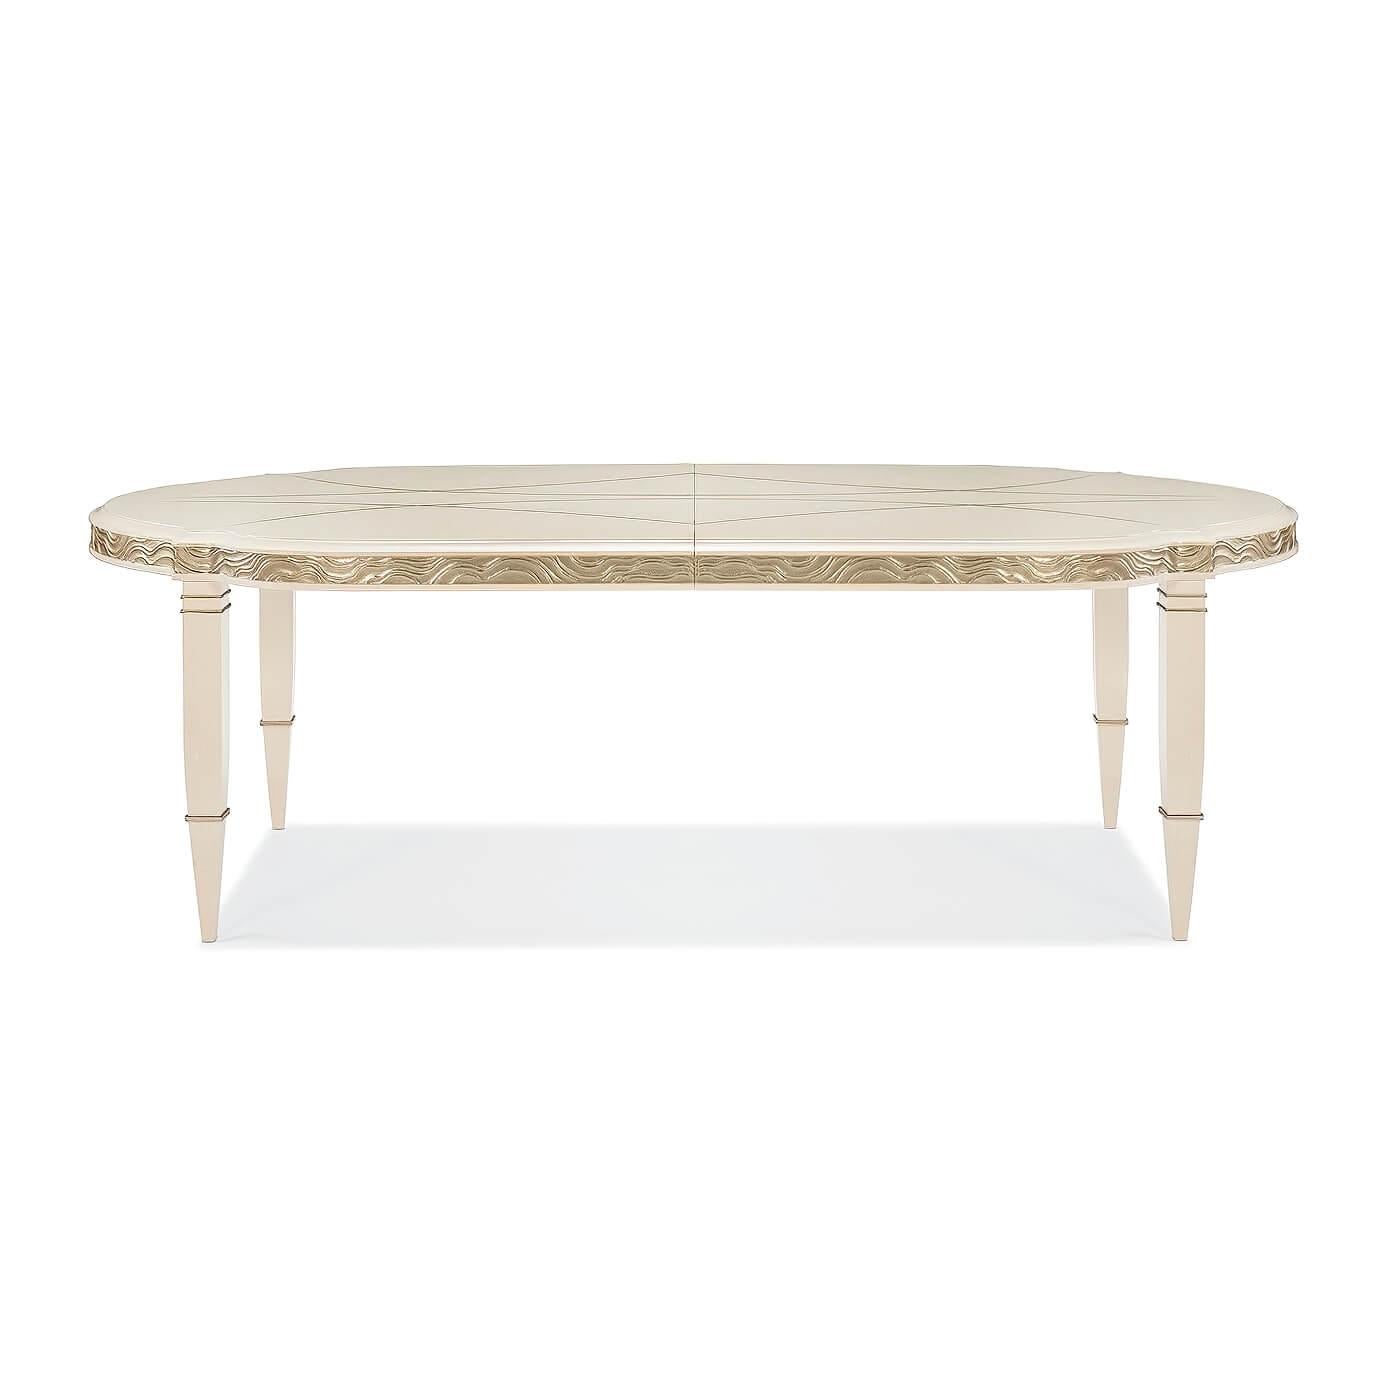 Modern Contemporary Oval Extending Dining Table For Sale